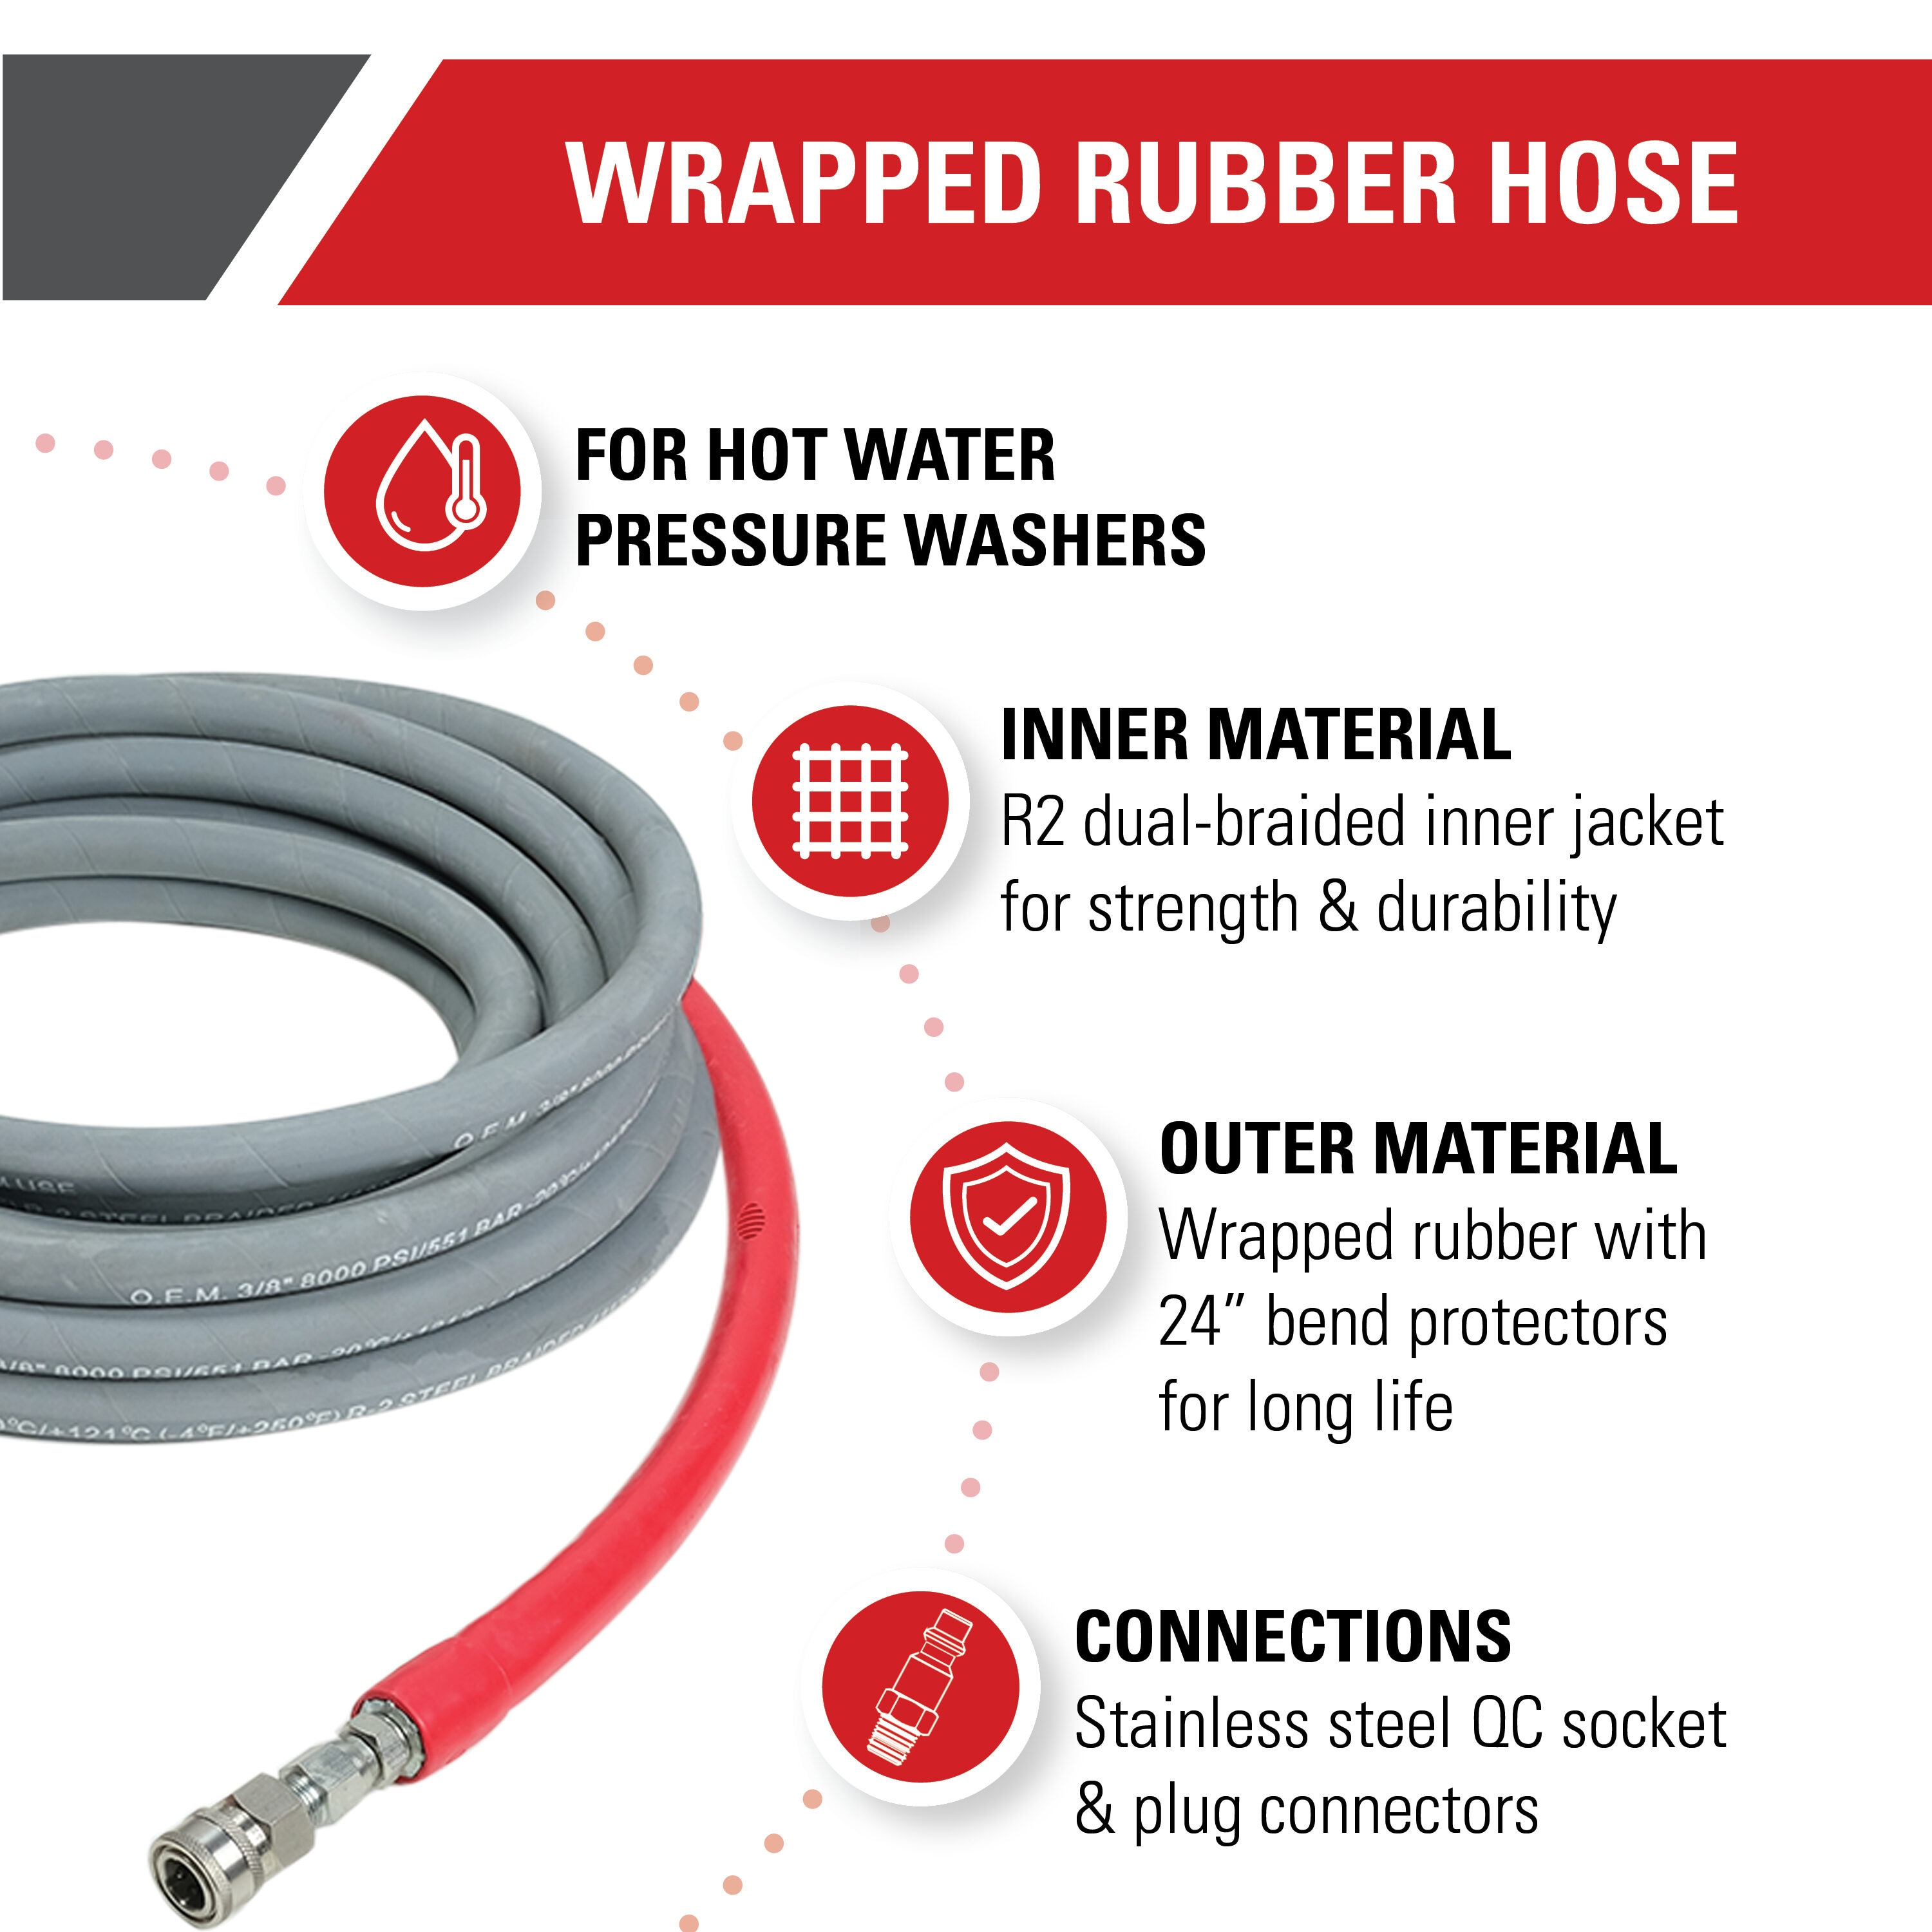 Bentism 100ft 4200 PSI High Pressure Power Washer Hose 1/4 inch Quick Connection